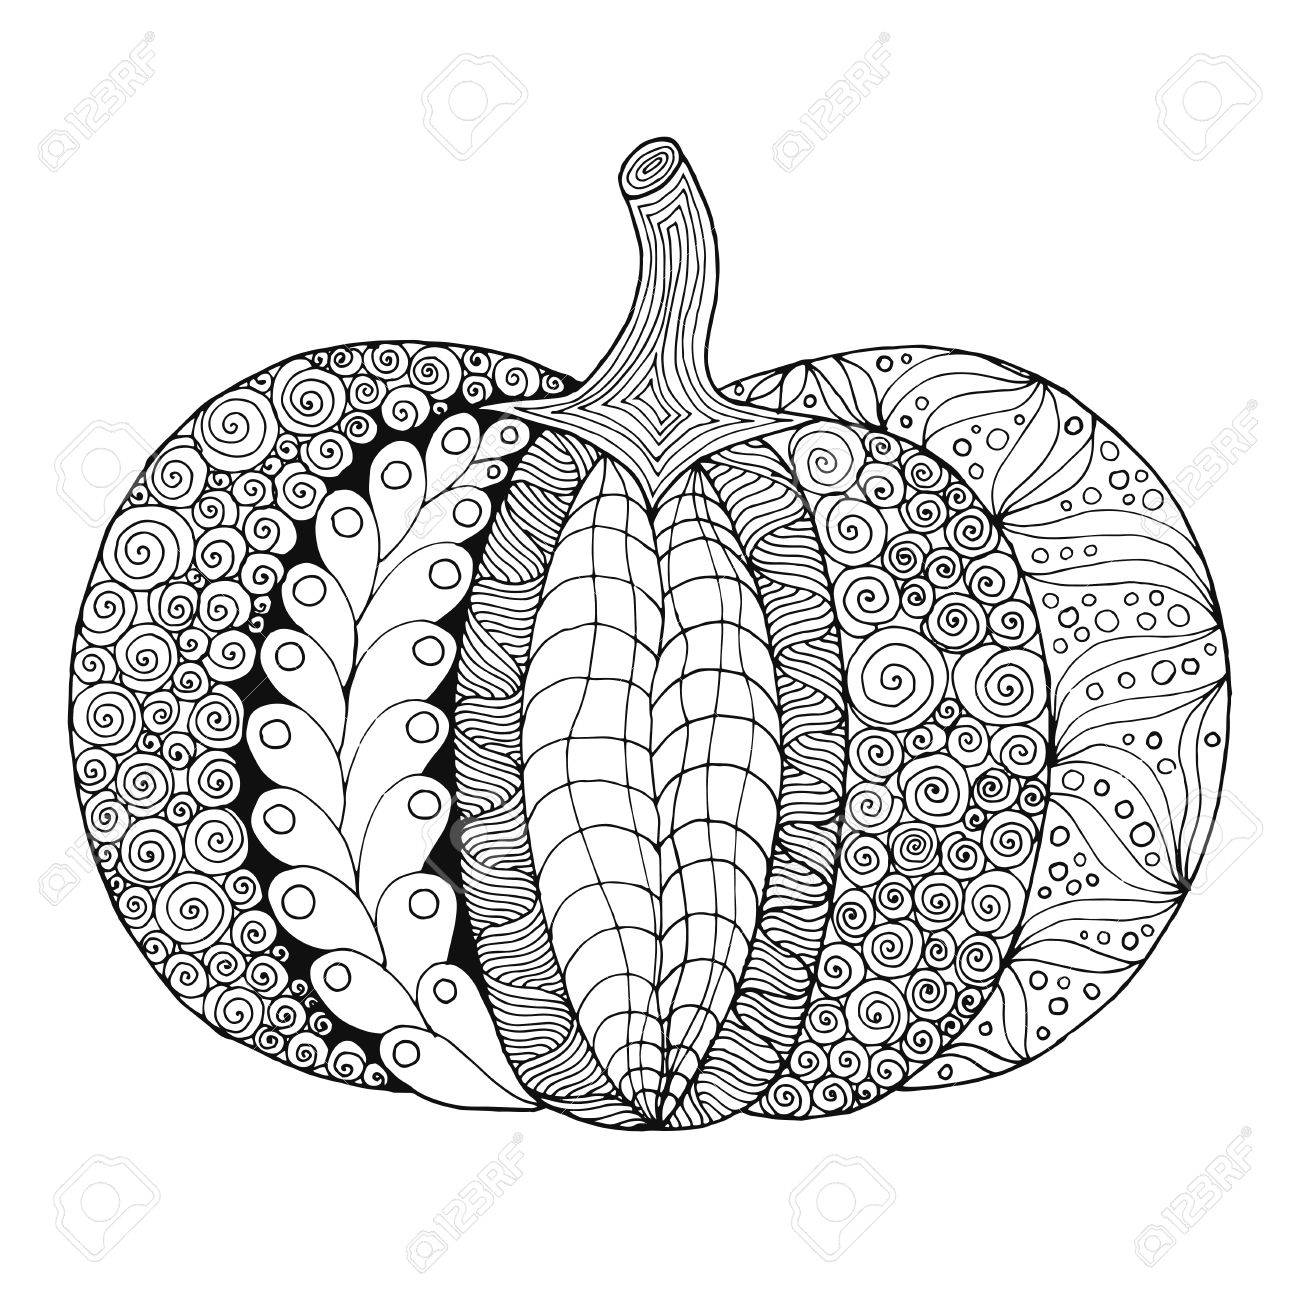 Zentangle stylized pumpkin black white hand drawn vector illustration traditional symbol of thanksgiving halloween autumn sketch for colouring page decoration poster print royalty free svg cliparts vectors and stock illustration image